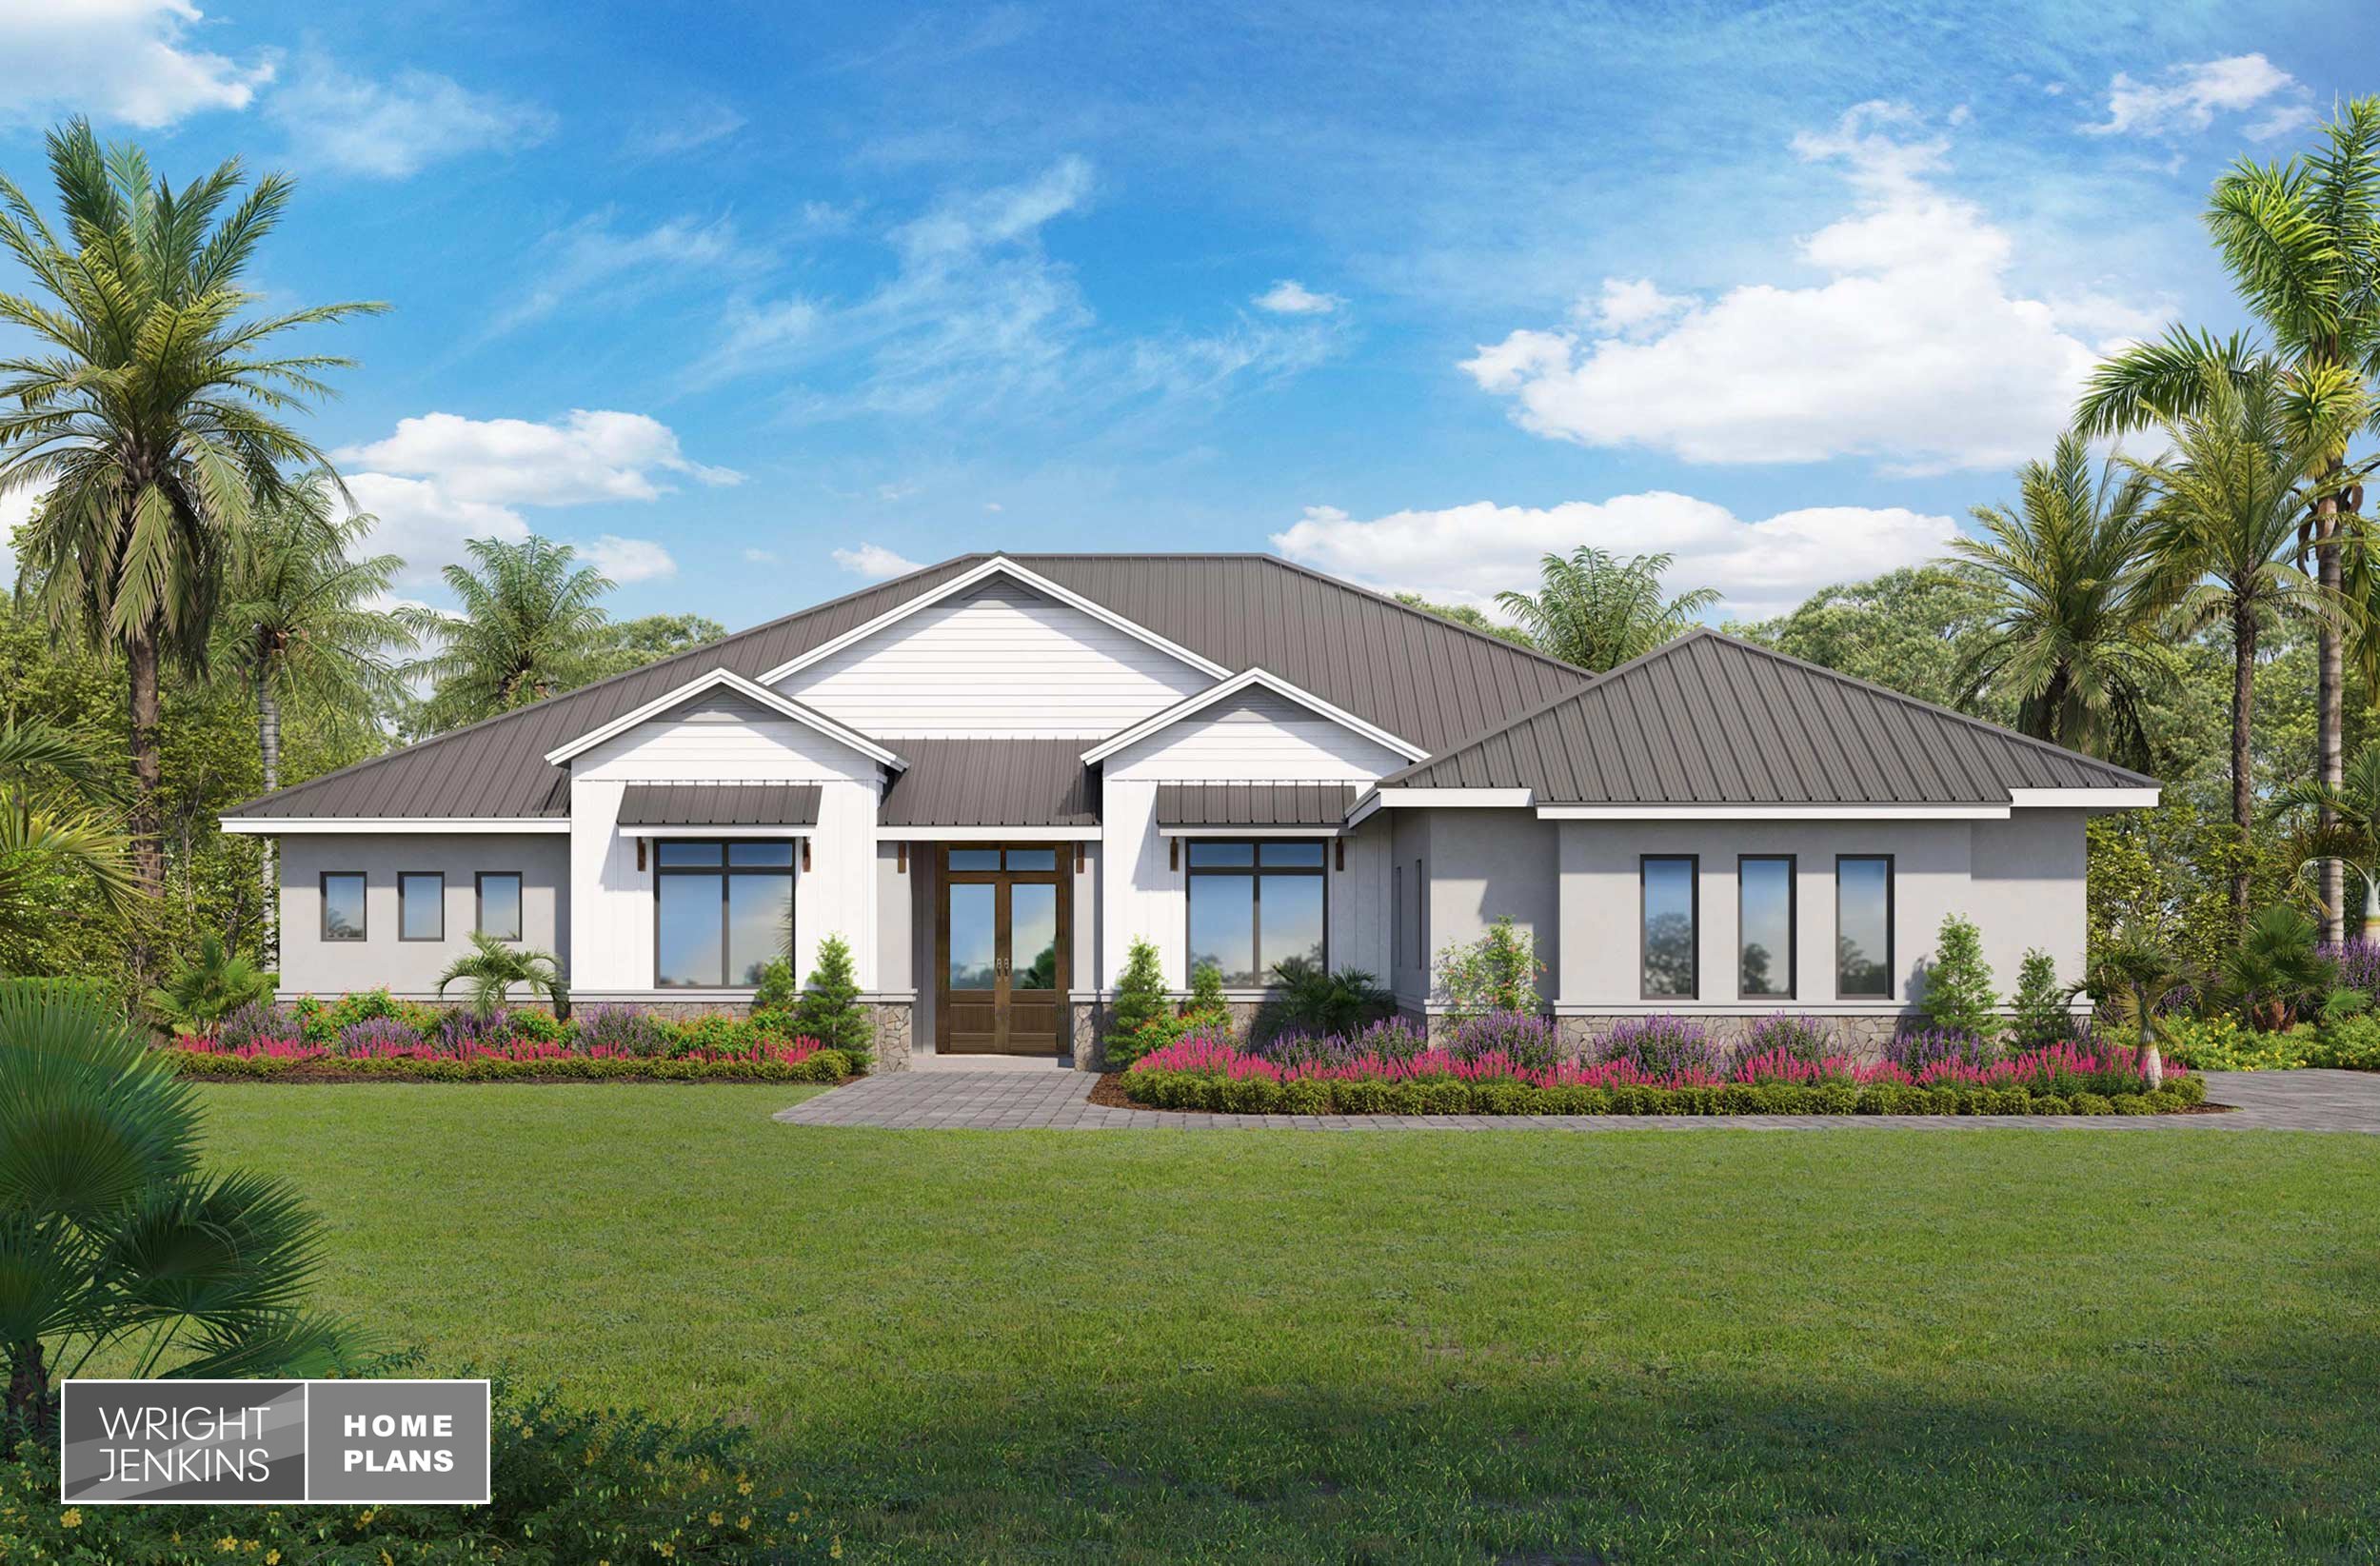    Featured Plan: Abbey Home Plan #939   